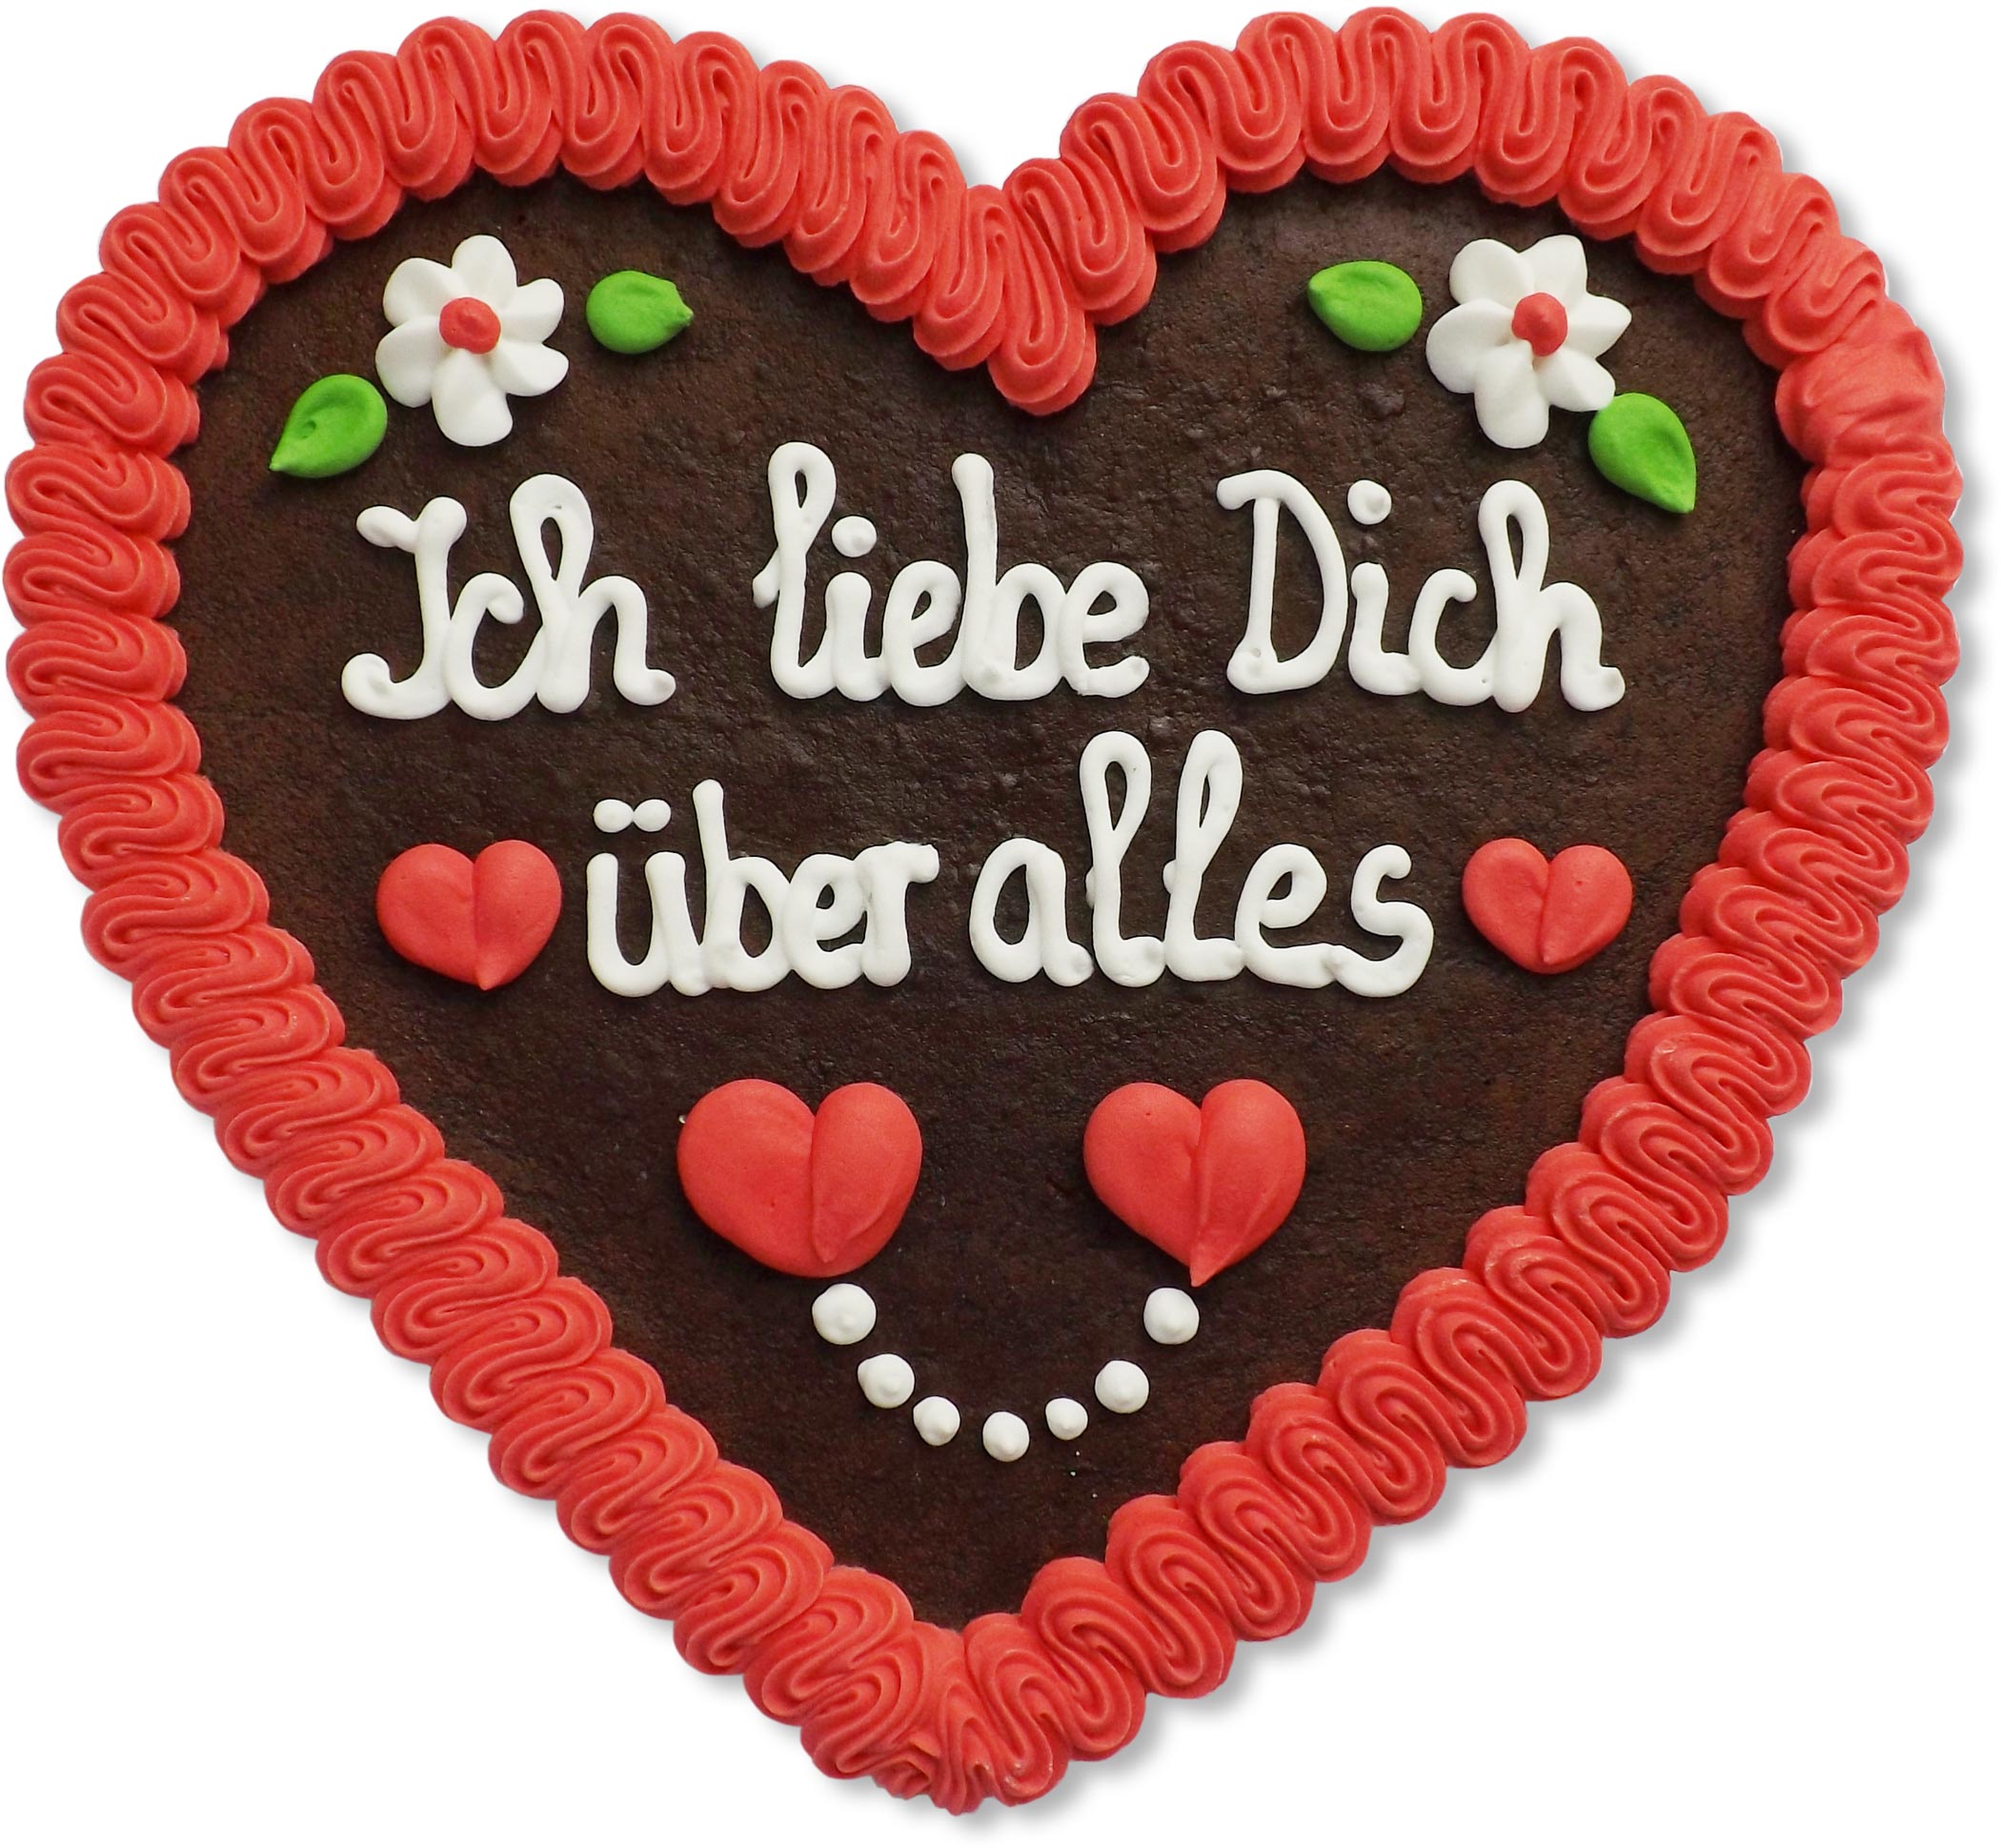 Ich liebe dich is the ultimate expression of emotion a person can make towa...